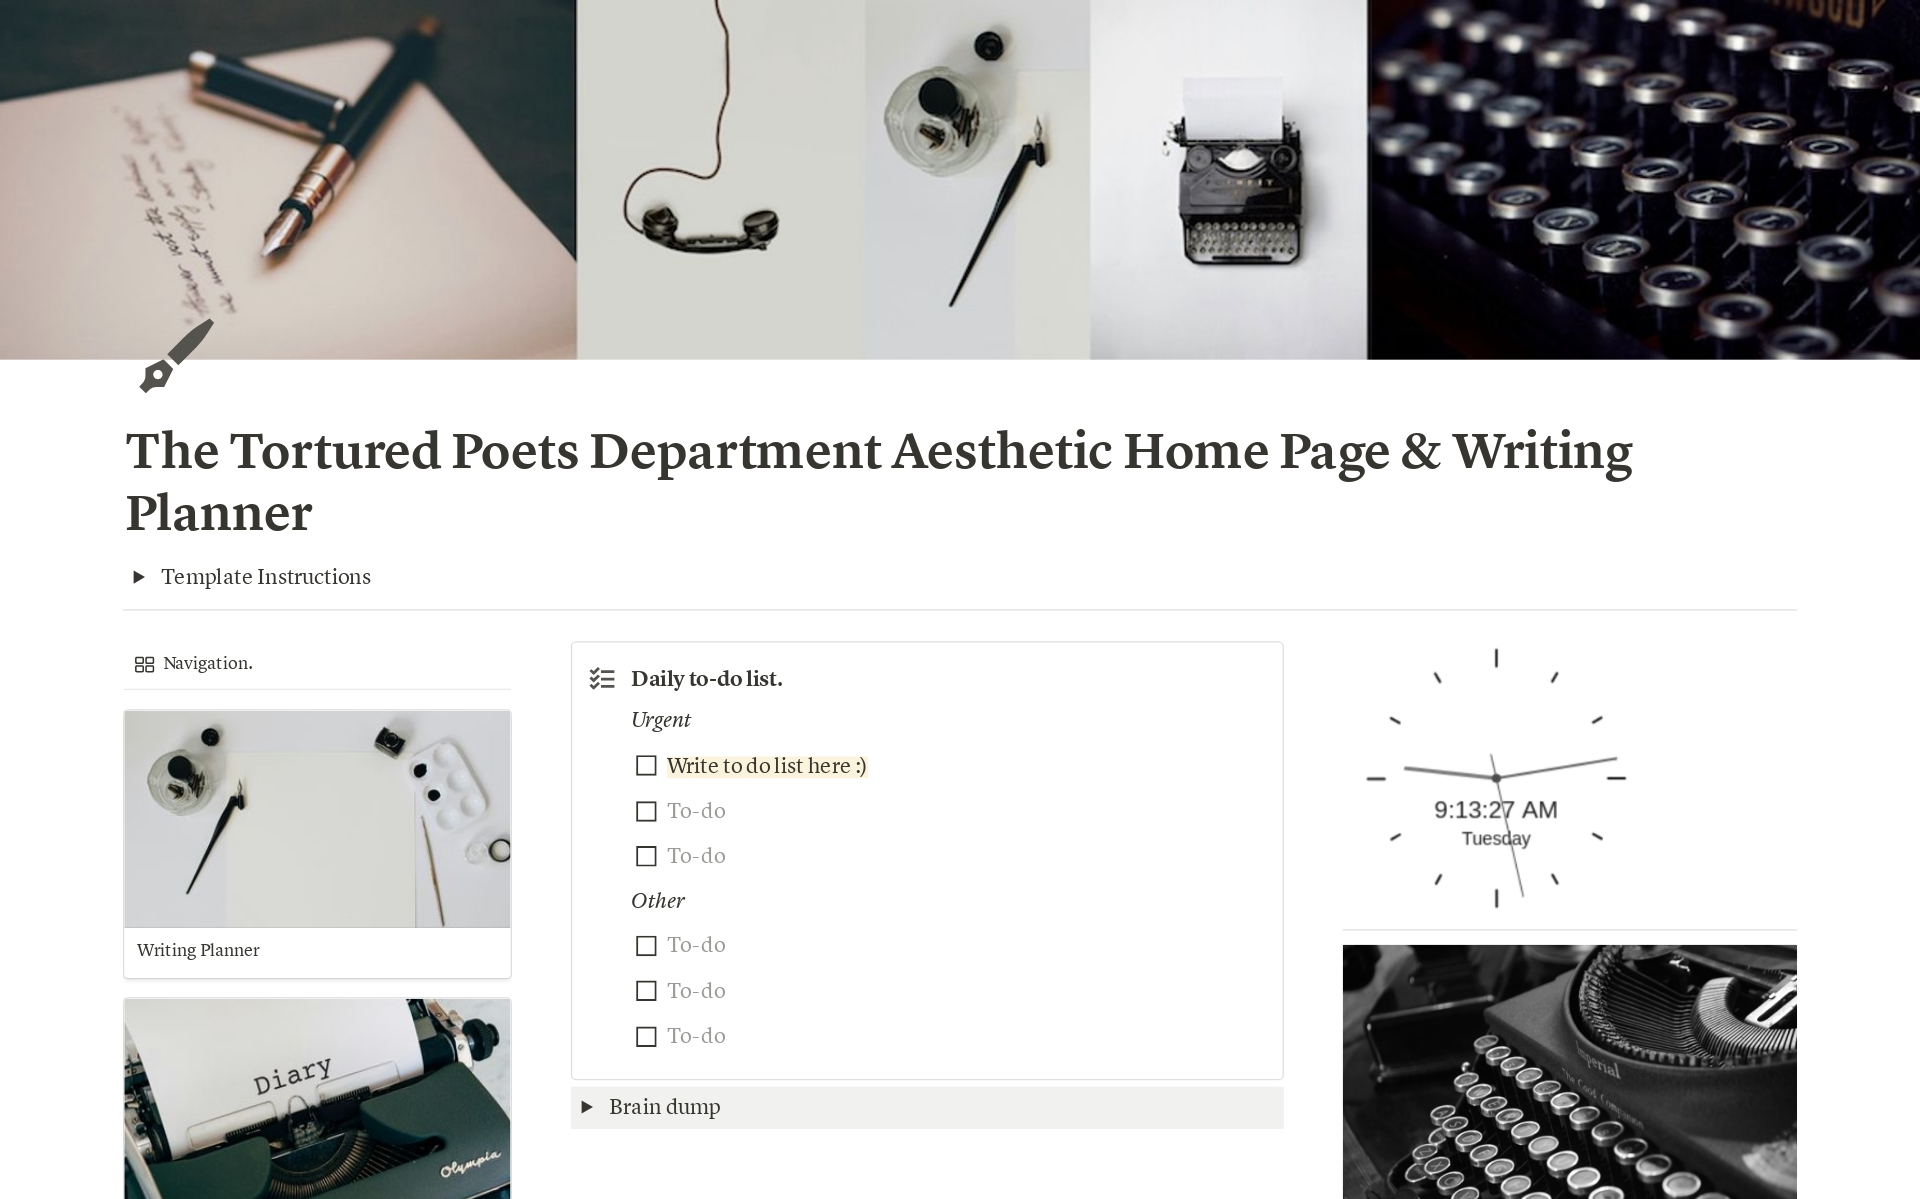 The Tortured Poets Department Aesthetic Home Pageのテンプレートのプレビュー